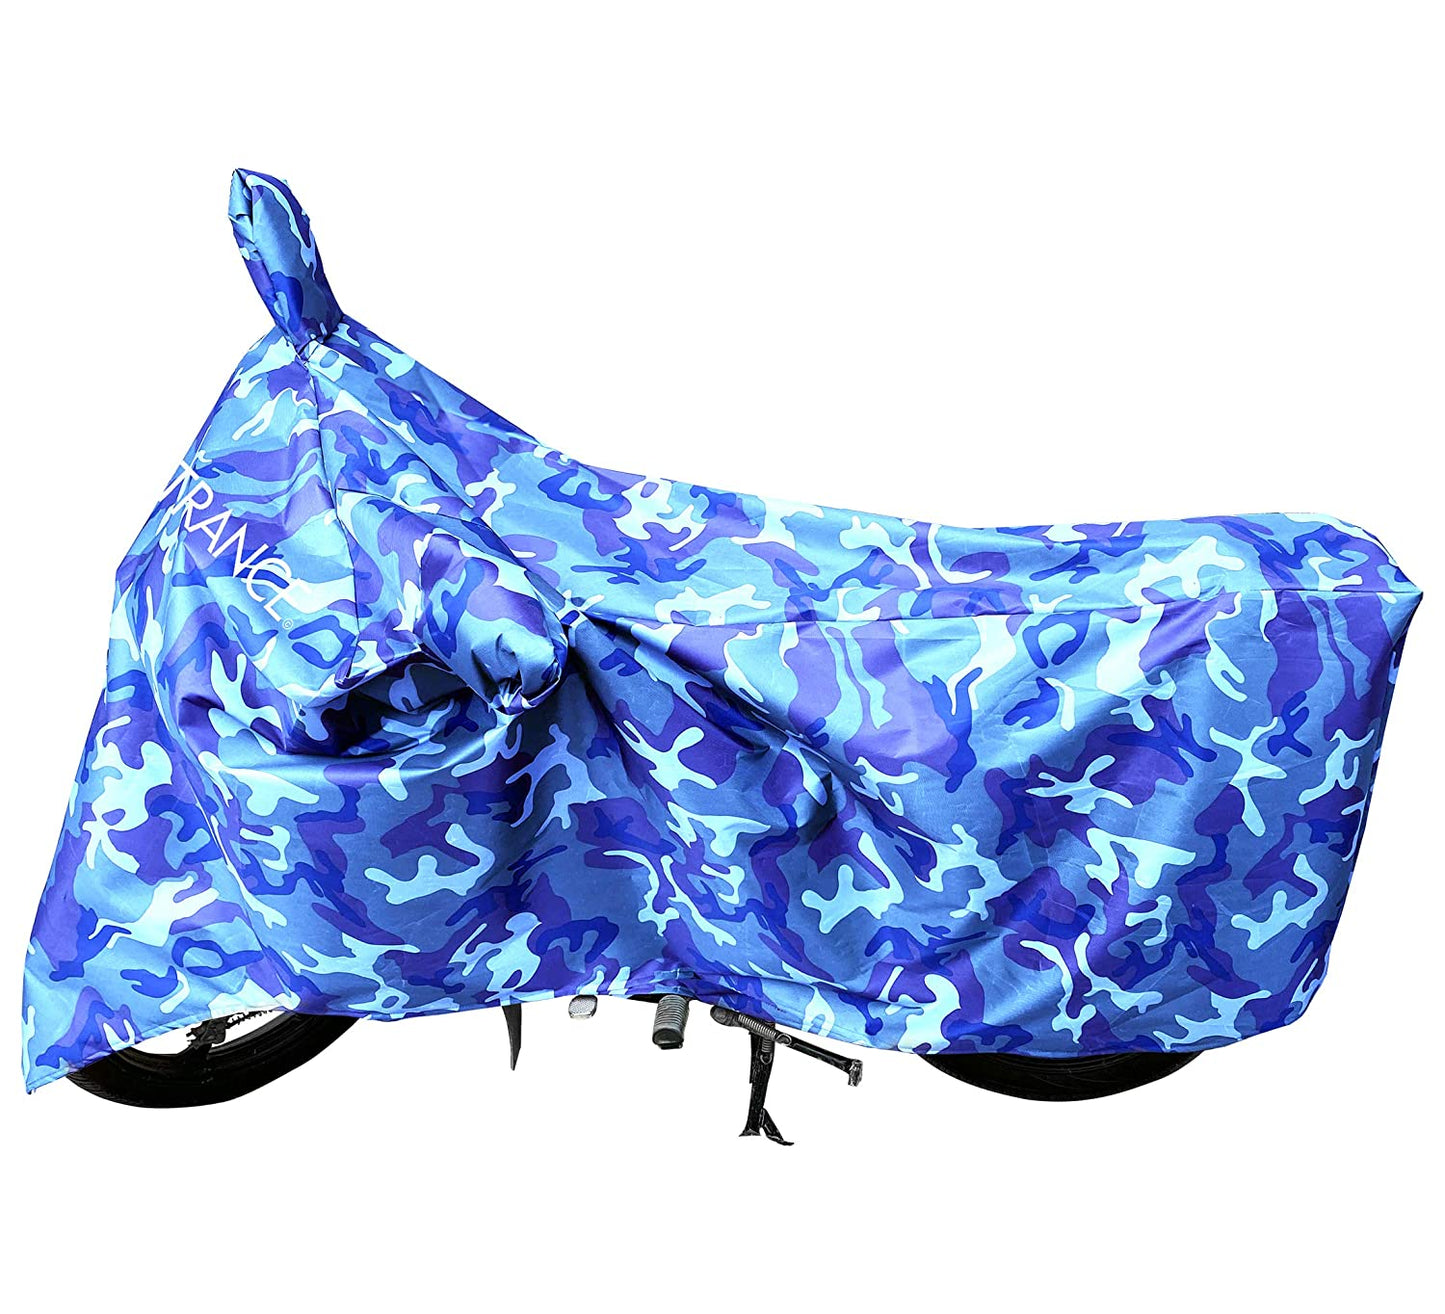 MotoTrance Jungle Bike Body Covers For Honda SP 125 2019 - Interlock-Stitched Waterproof and Heat Resistant with Mirror Pockets